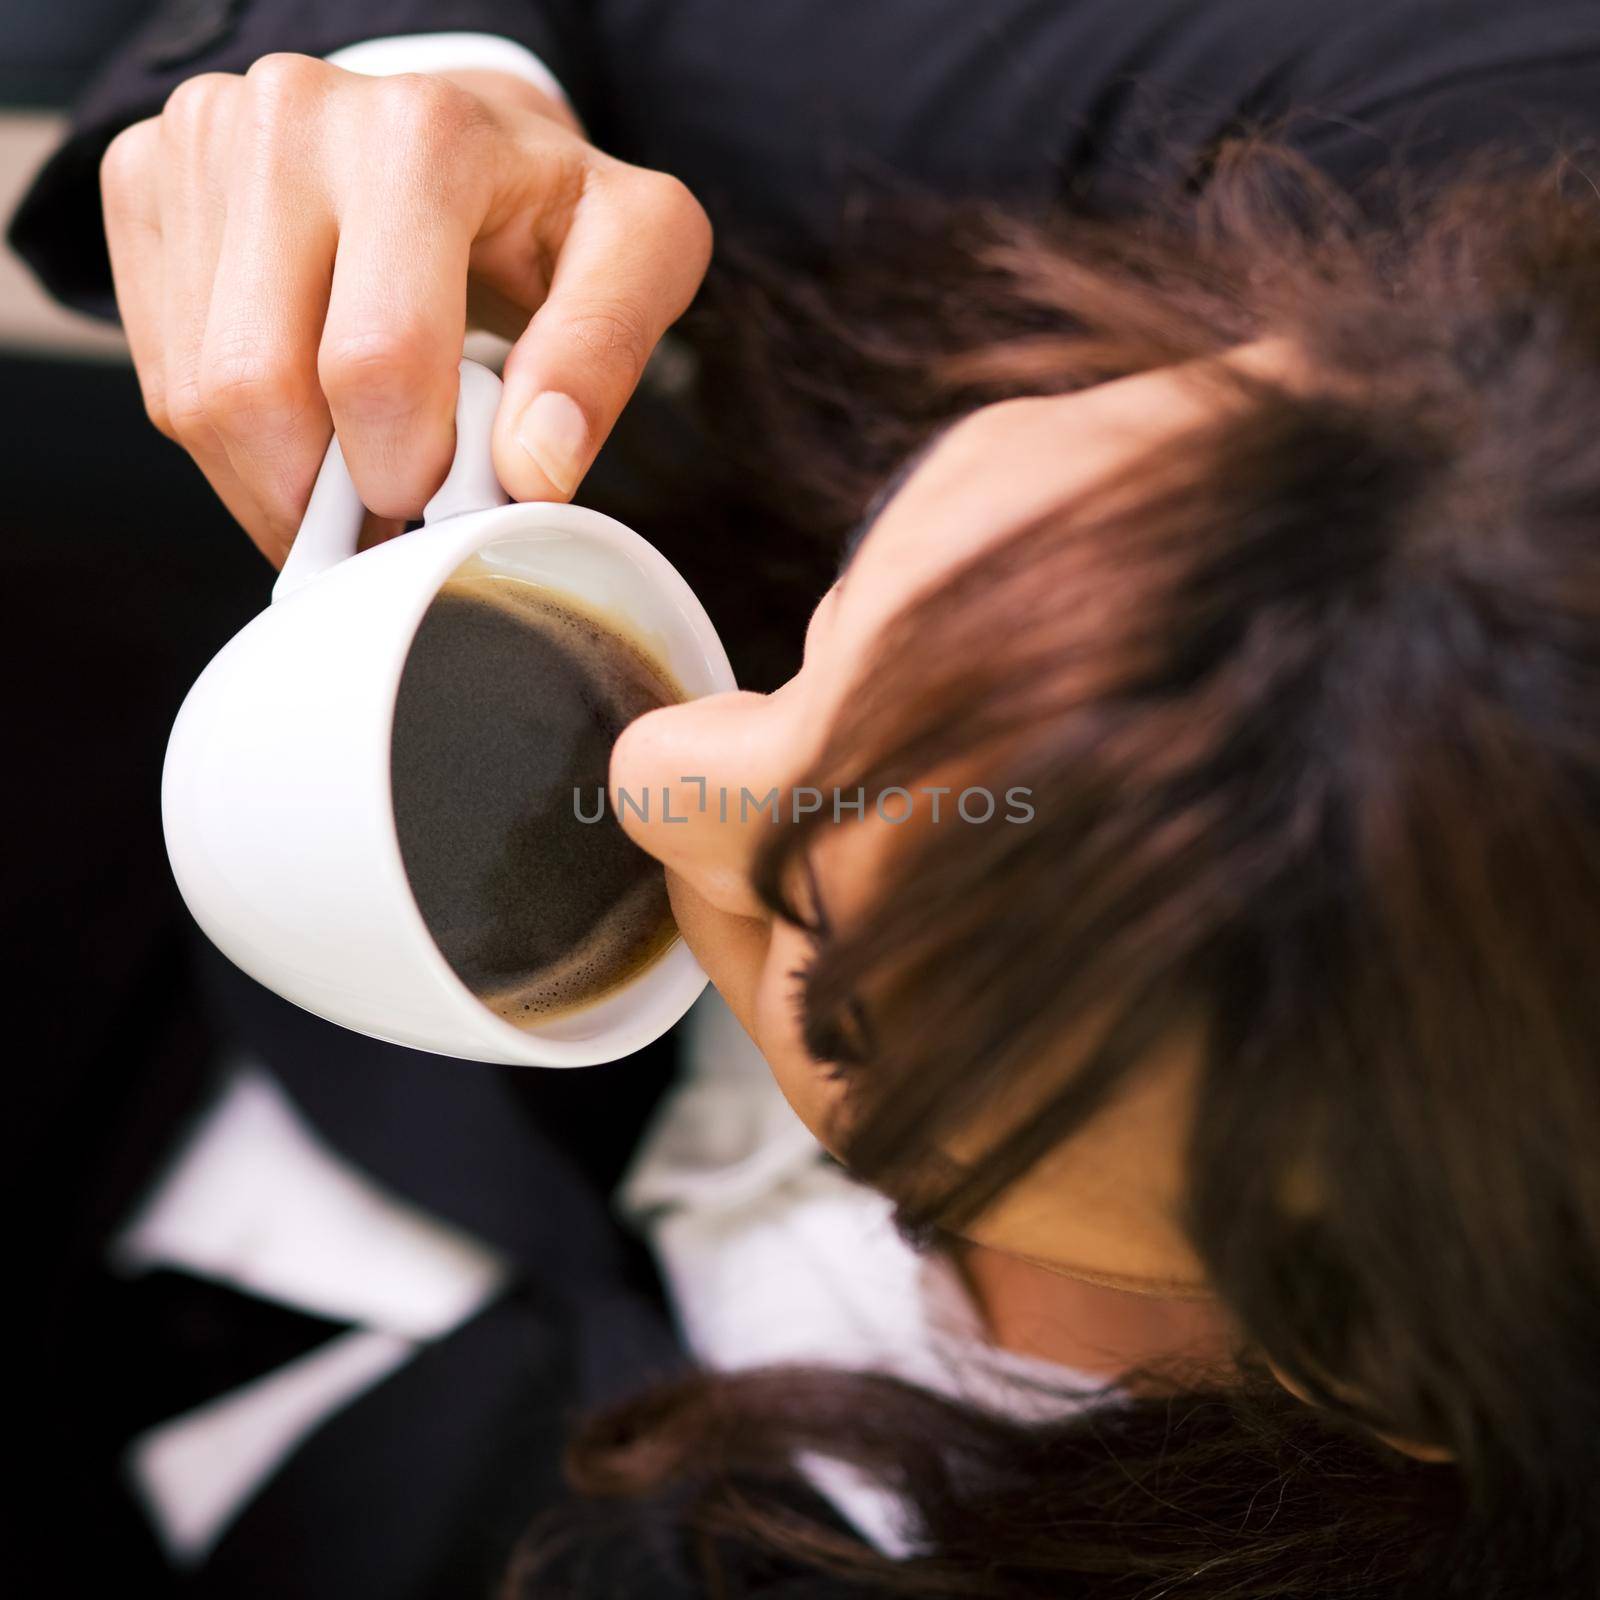 Woman pictured from above having a double espresso (shallow depth of field, focus on coffee)